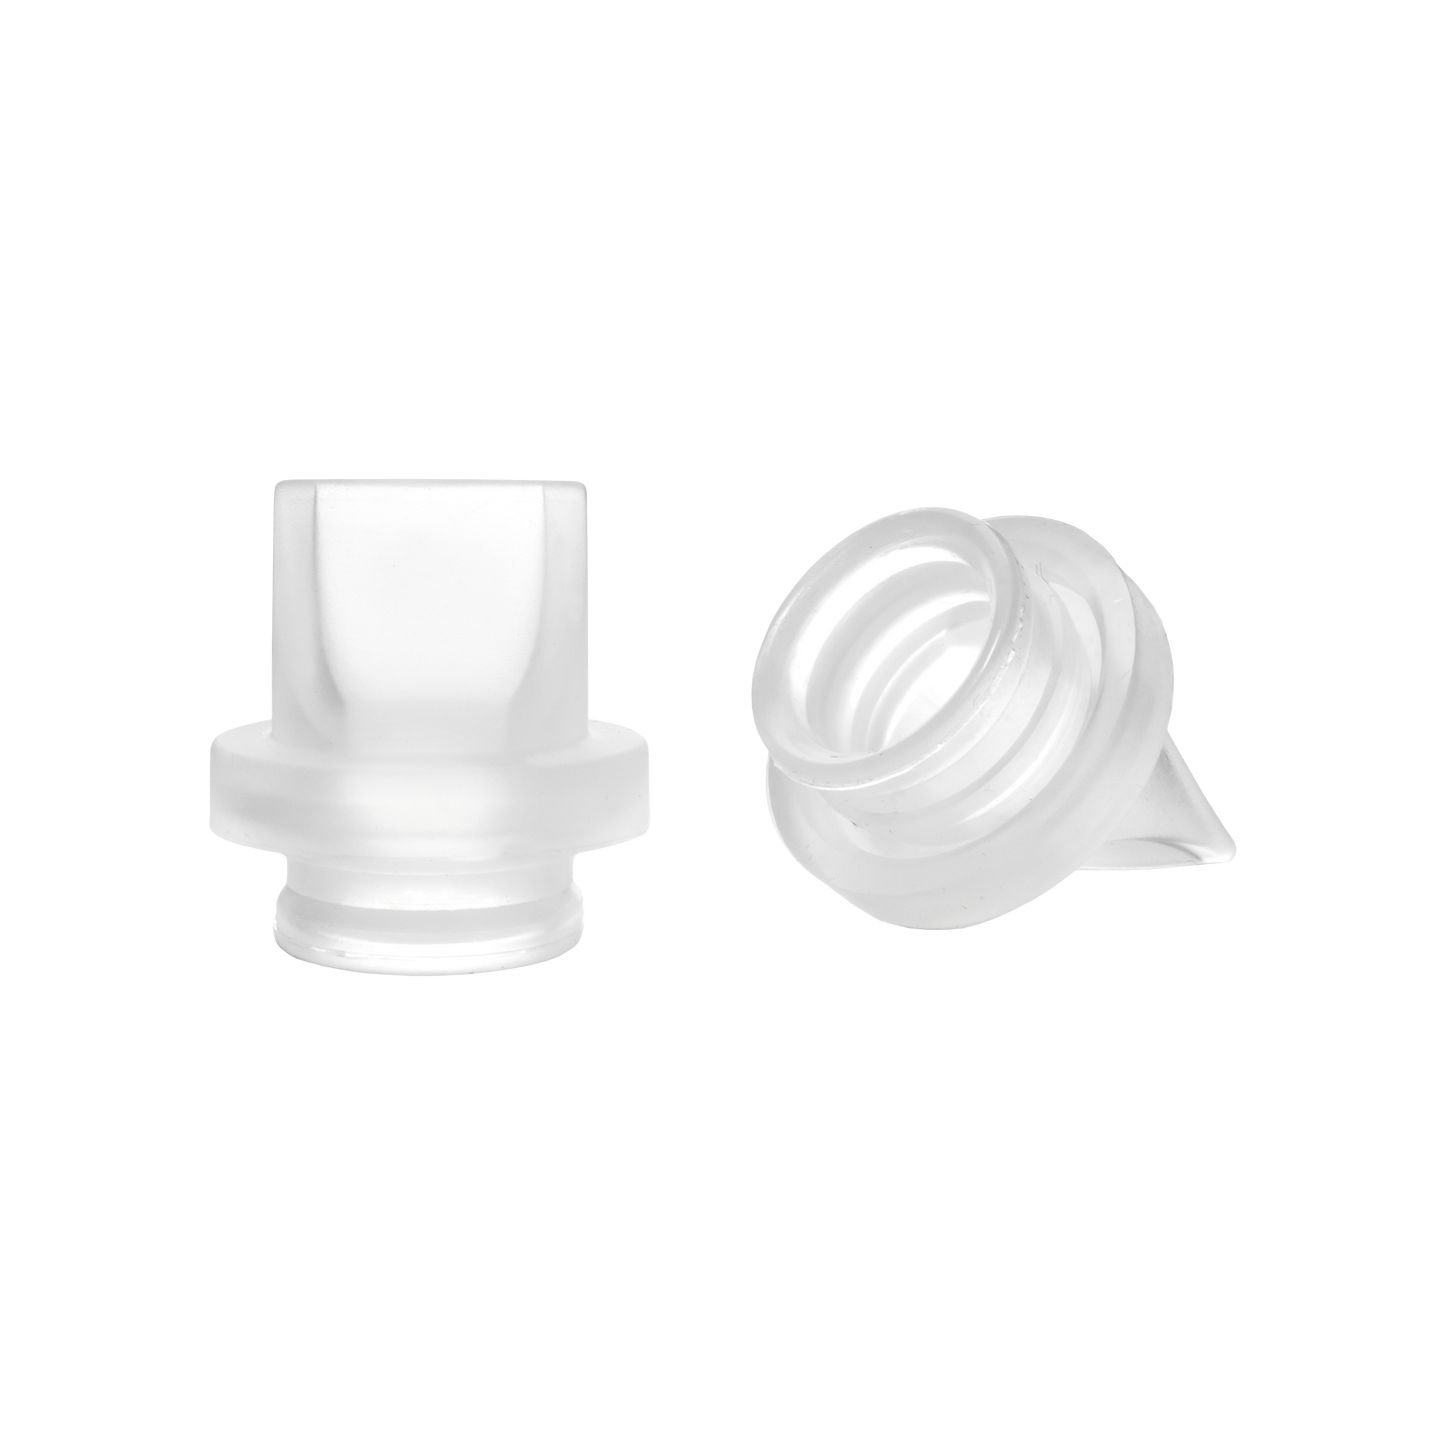 FlexSkin Replacement Silicone Valves